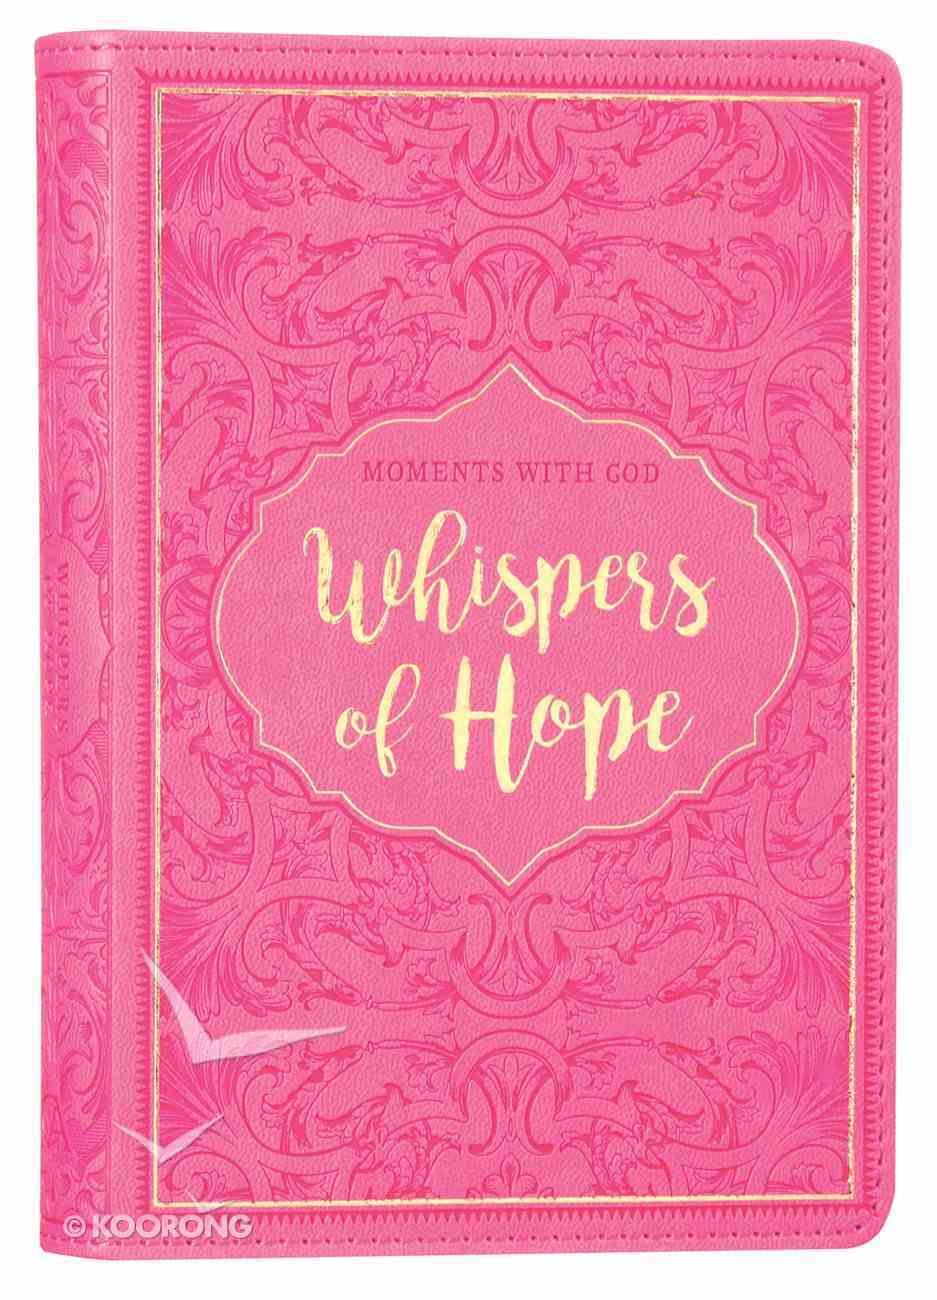 Whispers of Hope (365 Daily Devotions Series) Imitation Leather